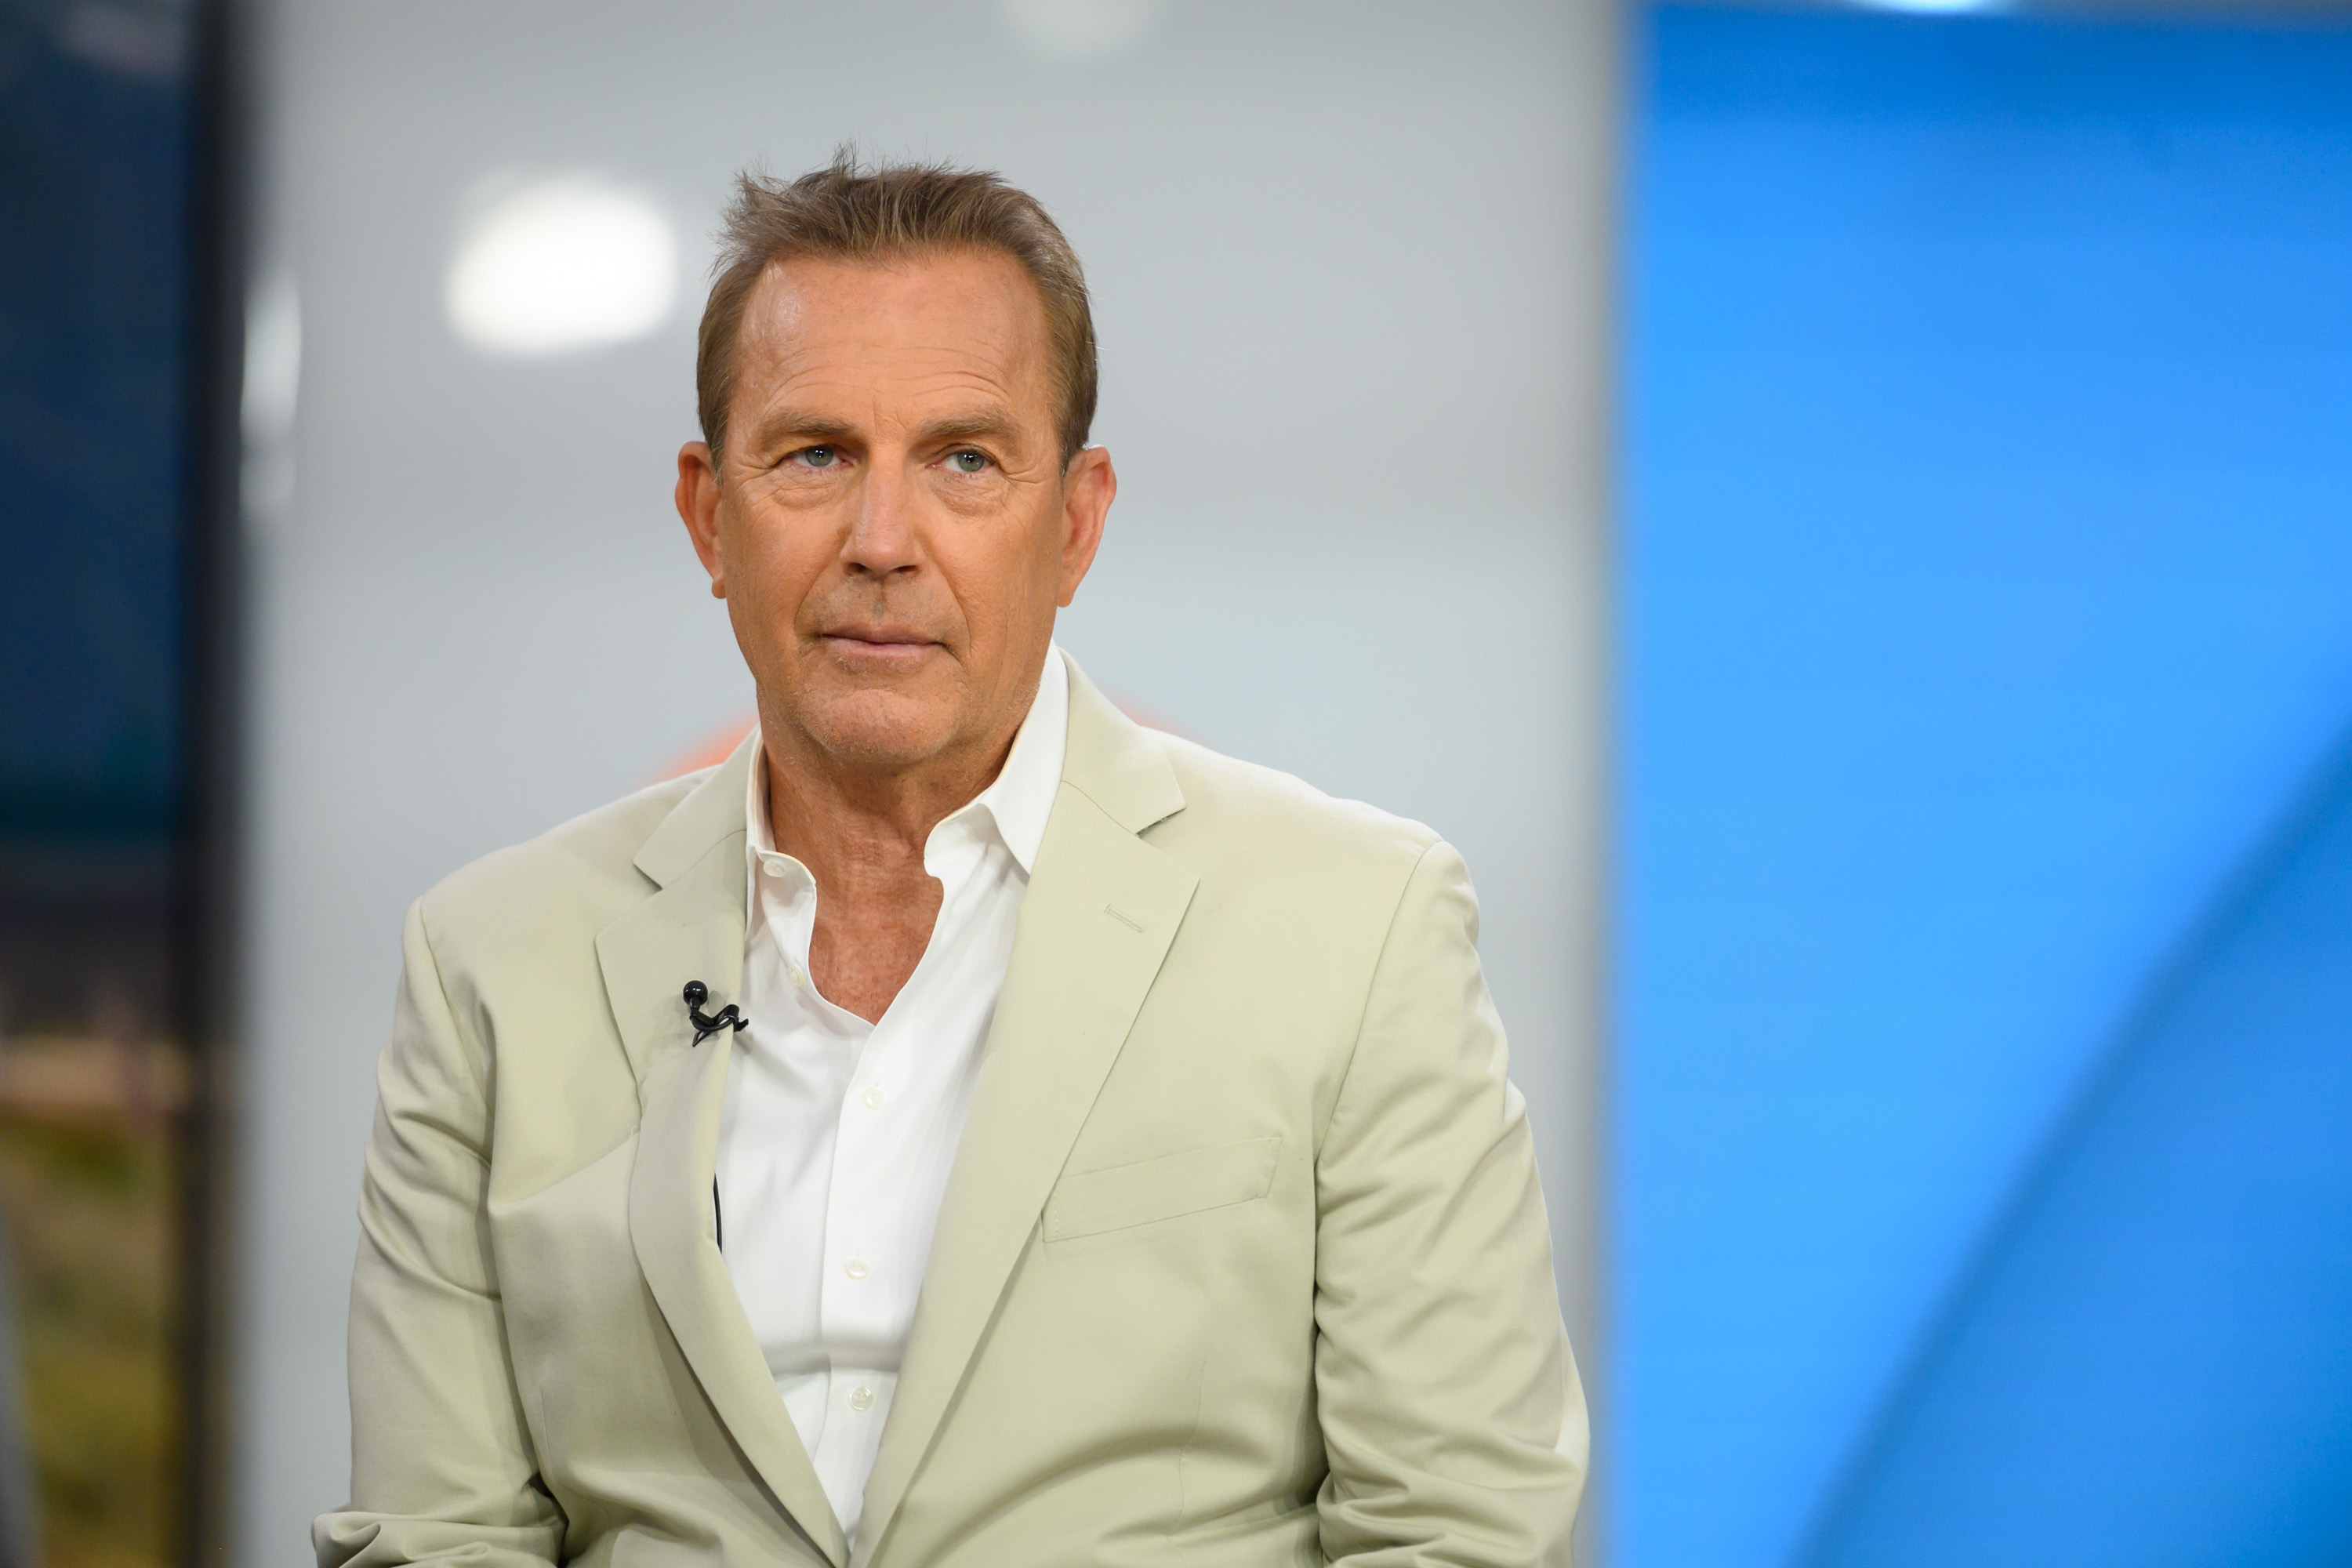 Kevin Costner on “Today” on June 17, 2019 | Source: Getty Images